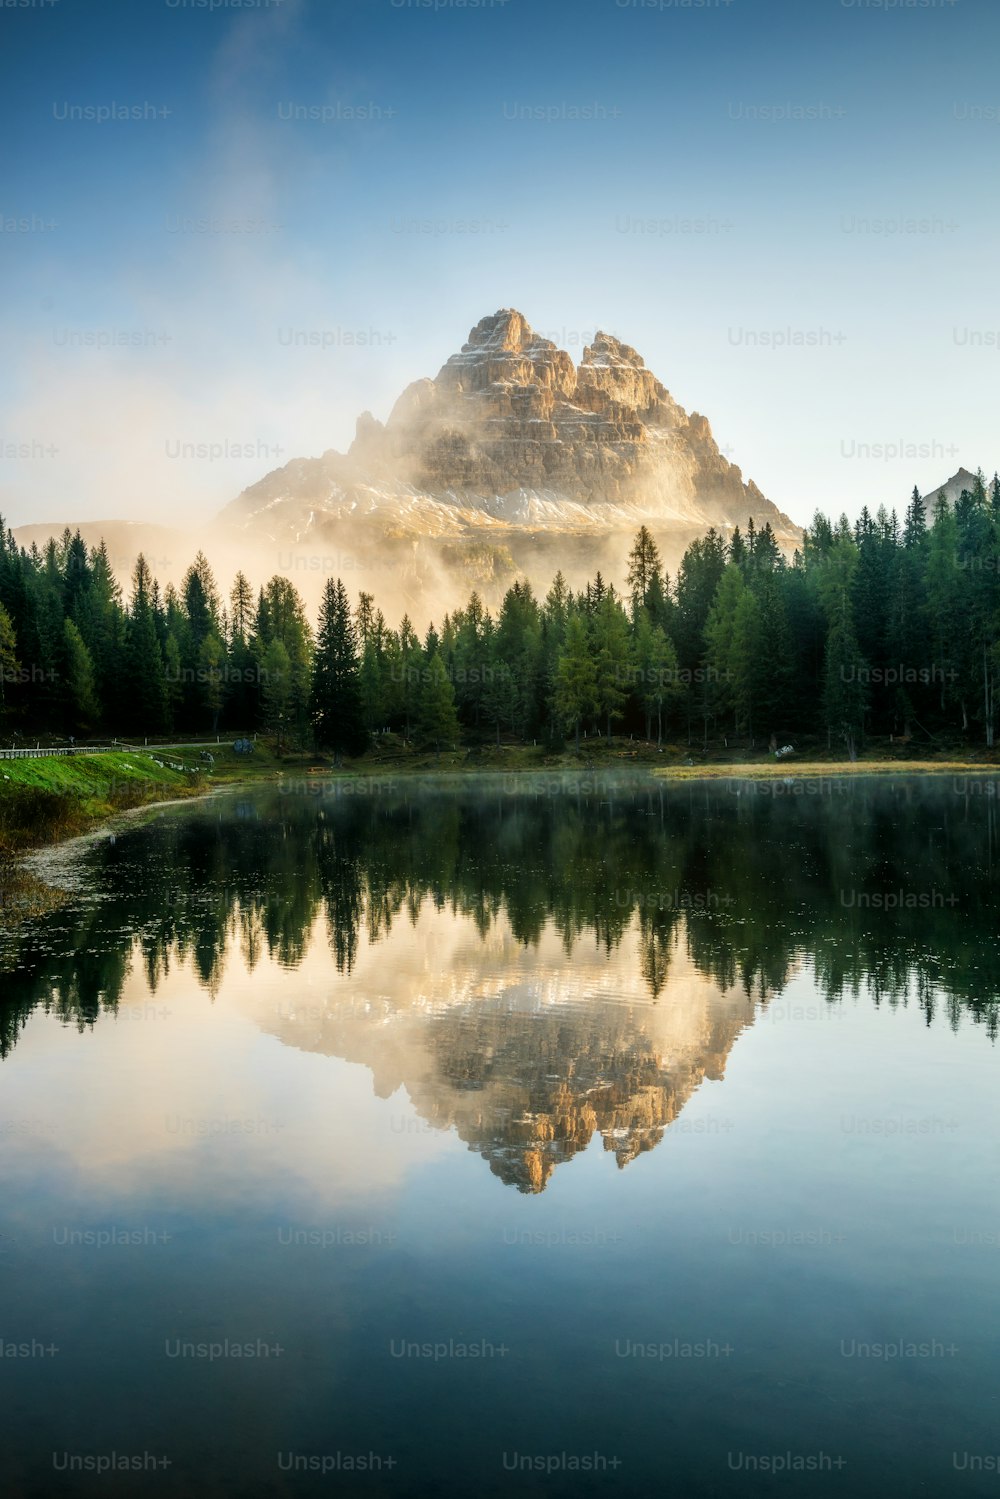 Majestic landscape of Antorno lake with famous Dolomites mountain peak of Tre Cime di Lavaredo in background in Eastern Dolomites, Italy Europe. Beautiful nature scenery and scenic travel destination.